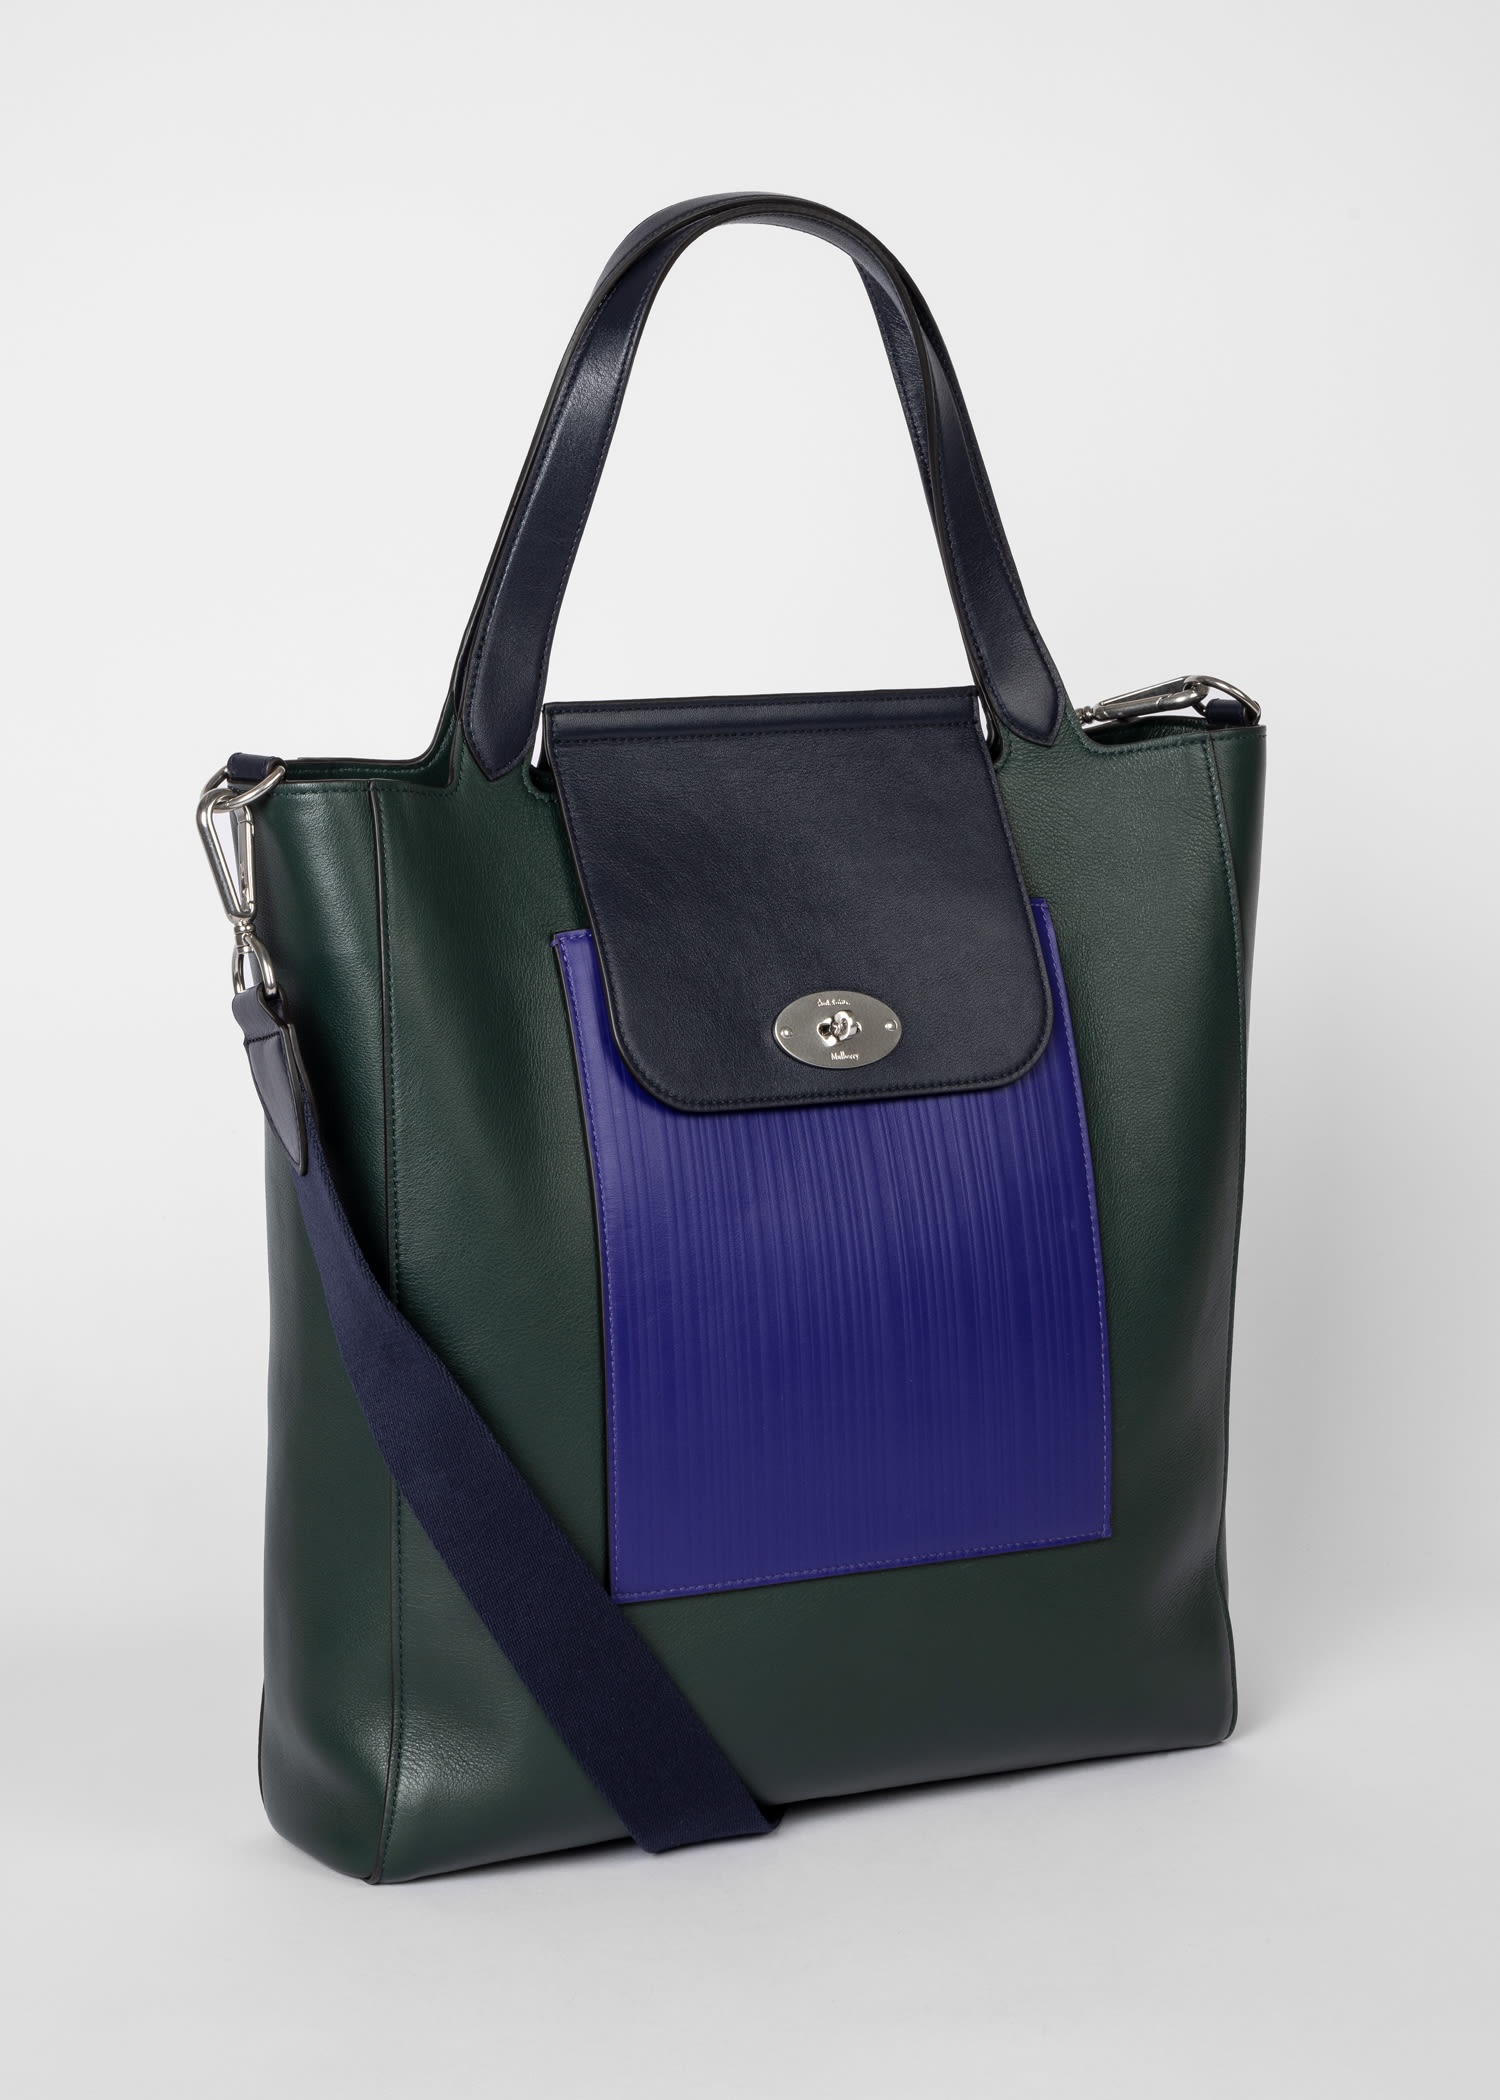 Mulberry x Paul Smith - Mulberry Green Antony Tote Bag - 4